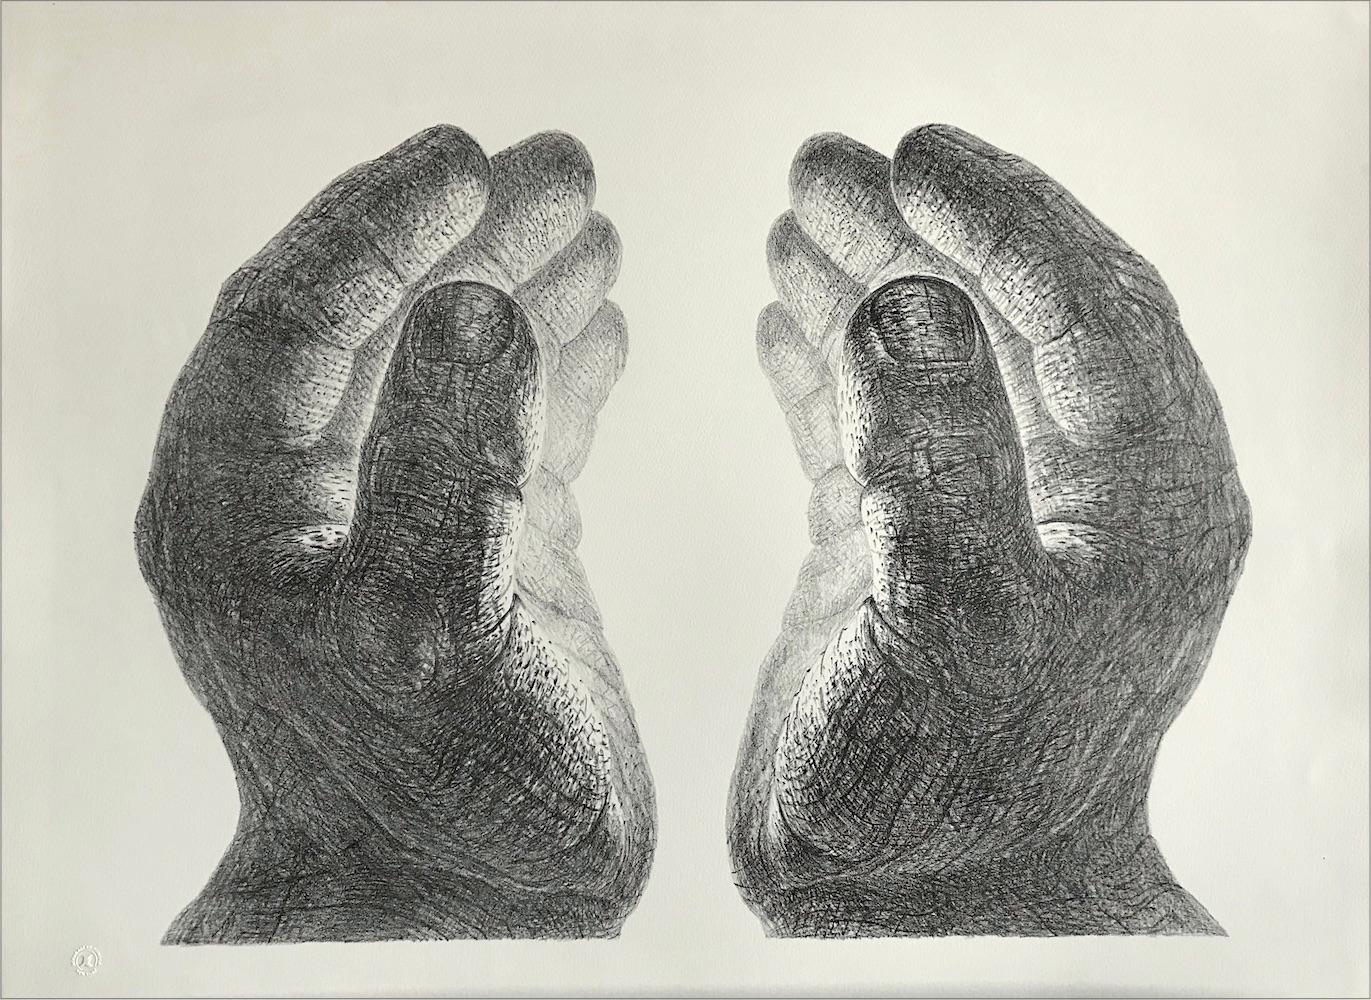 CREATION Hand Drawn Lithograph, Cupped Pair of Hands, Light Glow, Meditation